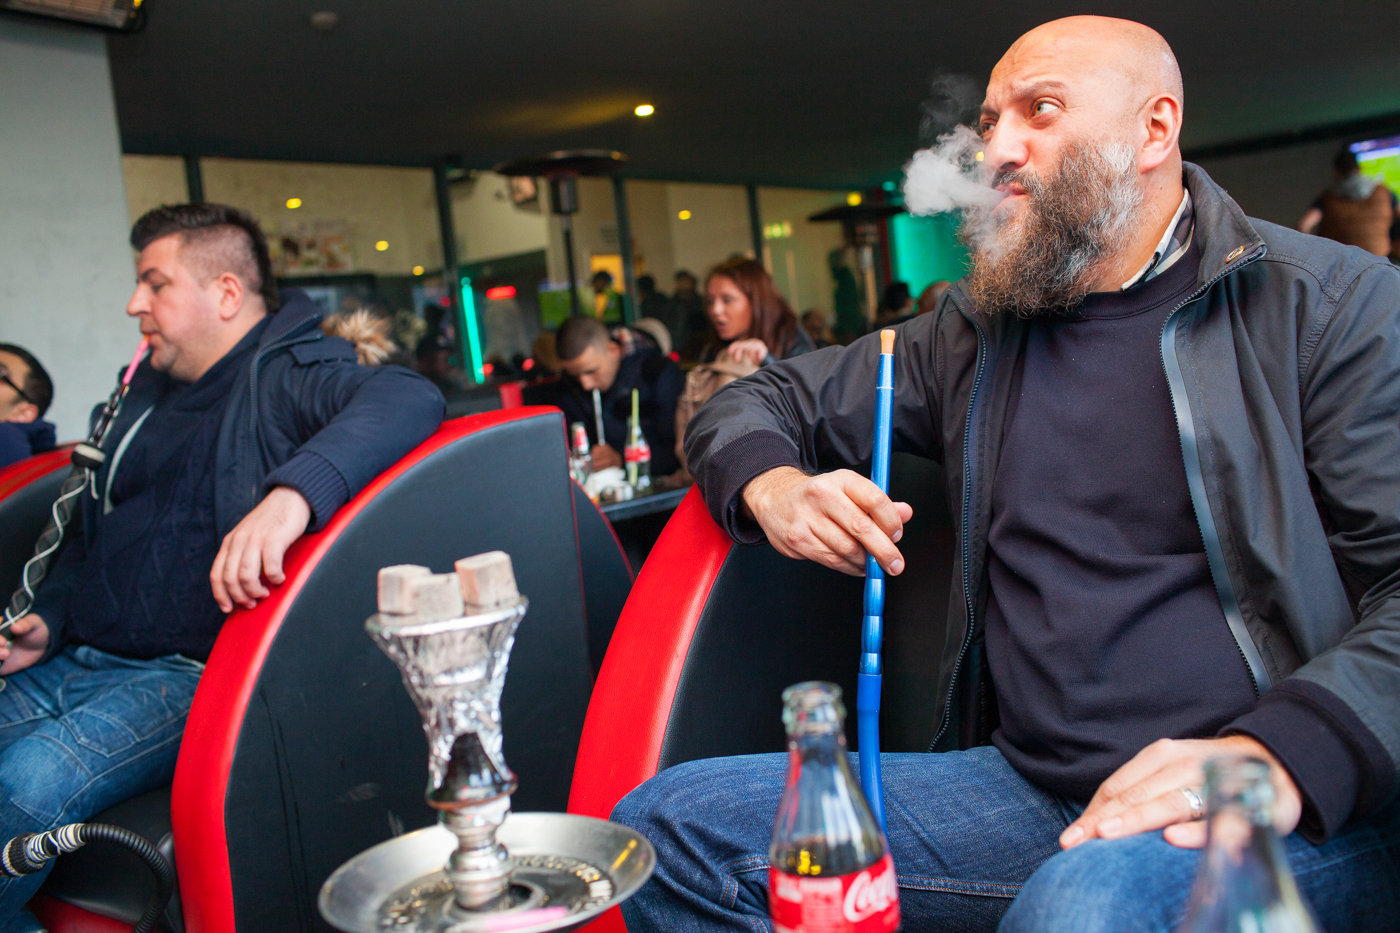 LEICESTER, UK MAY 2016RIAZ KHAN, a 50-year-old former football hooligan turned teacher watches Chelsea v Tottenham Hotspur on TV in a Shisha lounge in his home town of Leicester.On the 2nd May 2016, Leicester City football club became champions of England for the first time in their 132 year history.Leicester has been dubbed as most multicultural diversified city in England, thanks to scores of people that have flocked the city and who have hailed from different parts of the world. According to the Leicester city council, the city has the highest number of immigrants who have sought both temporary and permanent residence in England. Majority of these immigrants are people who have left their home countries in pursuit of job opportunities in England.  Photo by Peter Dench/Getty Images Assignment for ESPN